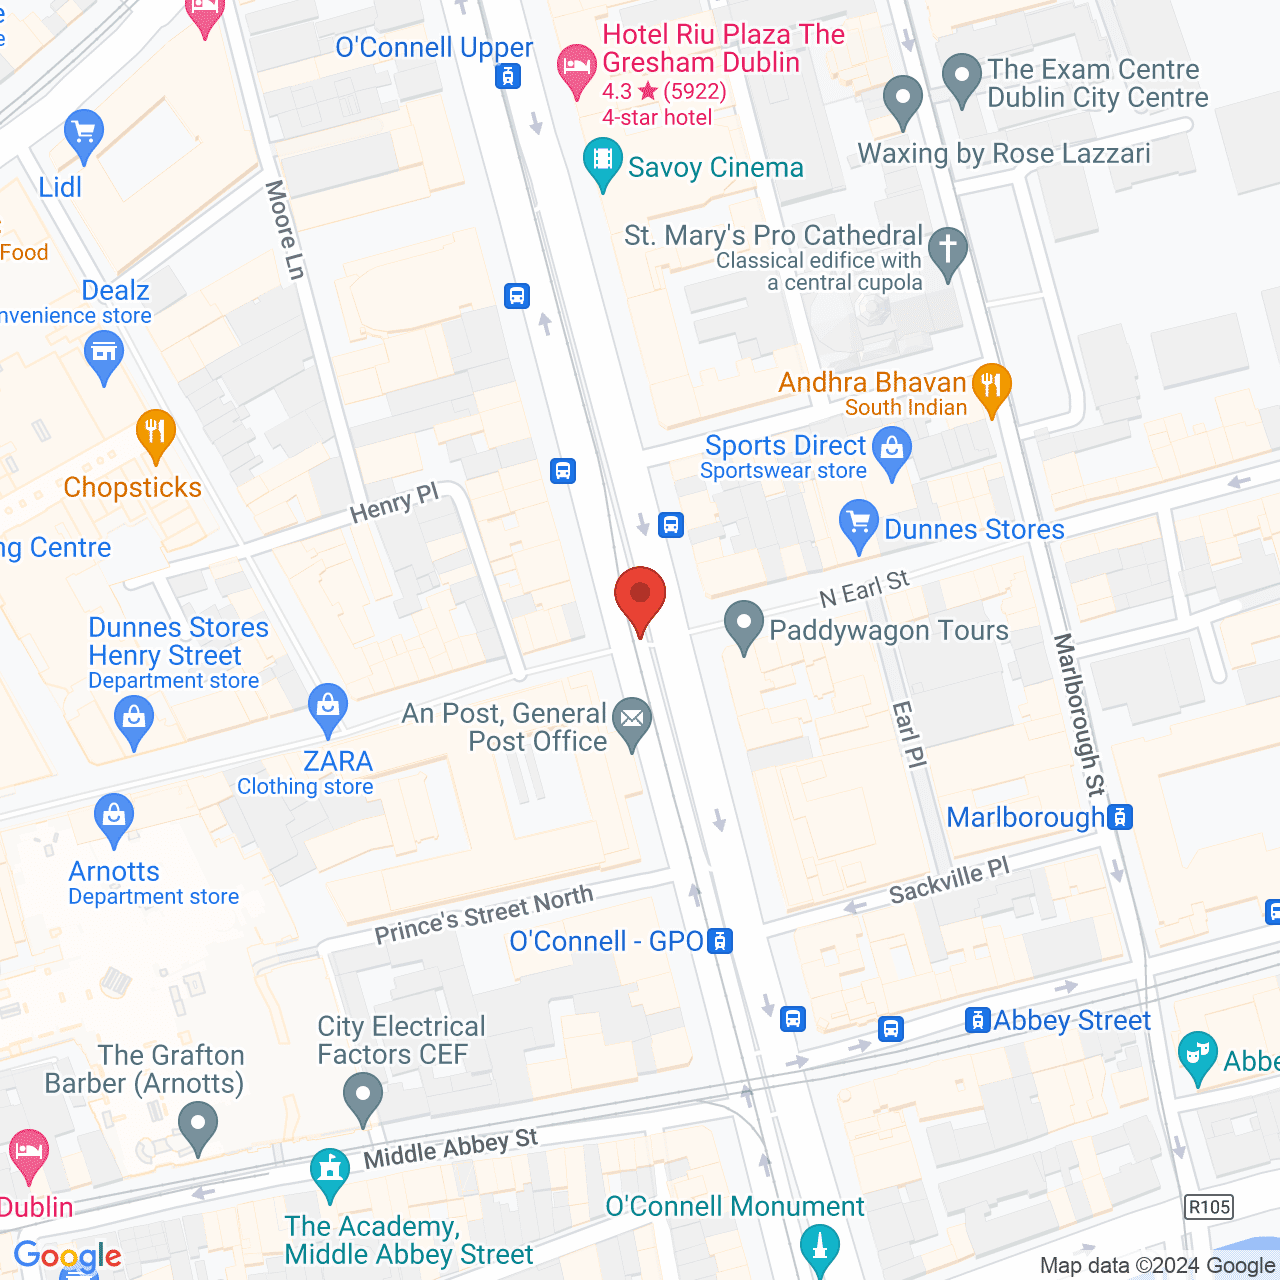 https://maps.googleapis.com/maps/api/staticmap?zoom=10&maptype=hybrid&scale=4&center=53.3498053,-6.2603097&markers=color:red%7C%7C53.3498053,-6.2603097&size=1000x1000&key=AIzaSyAQg6Liu52-a7wn17F9B-5c4QmJ9kTO3Mo